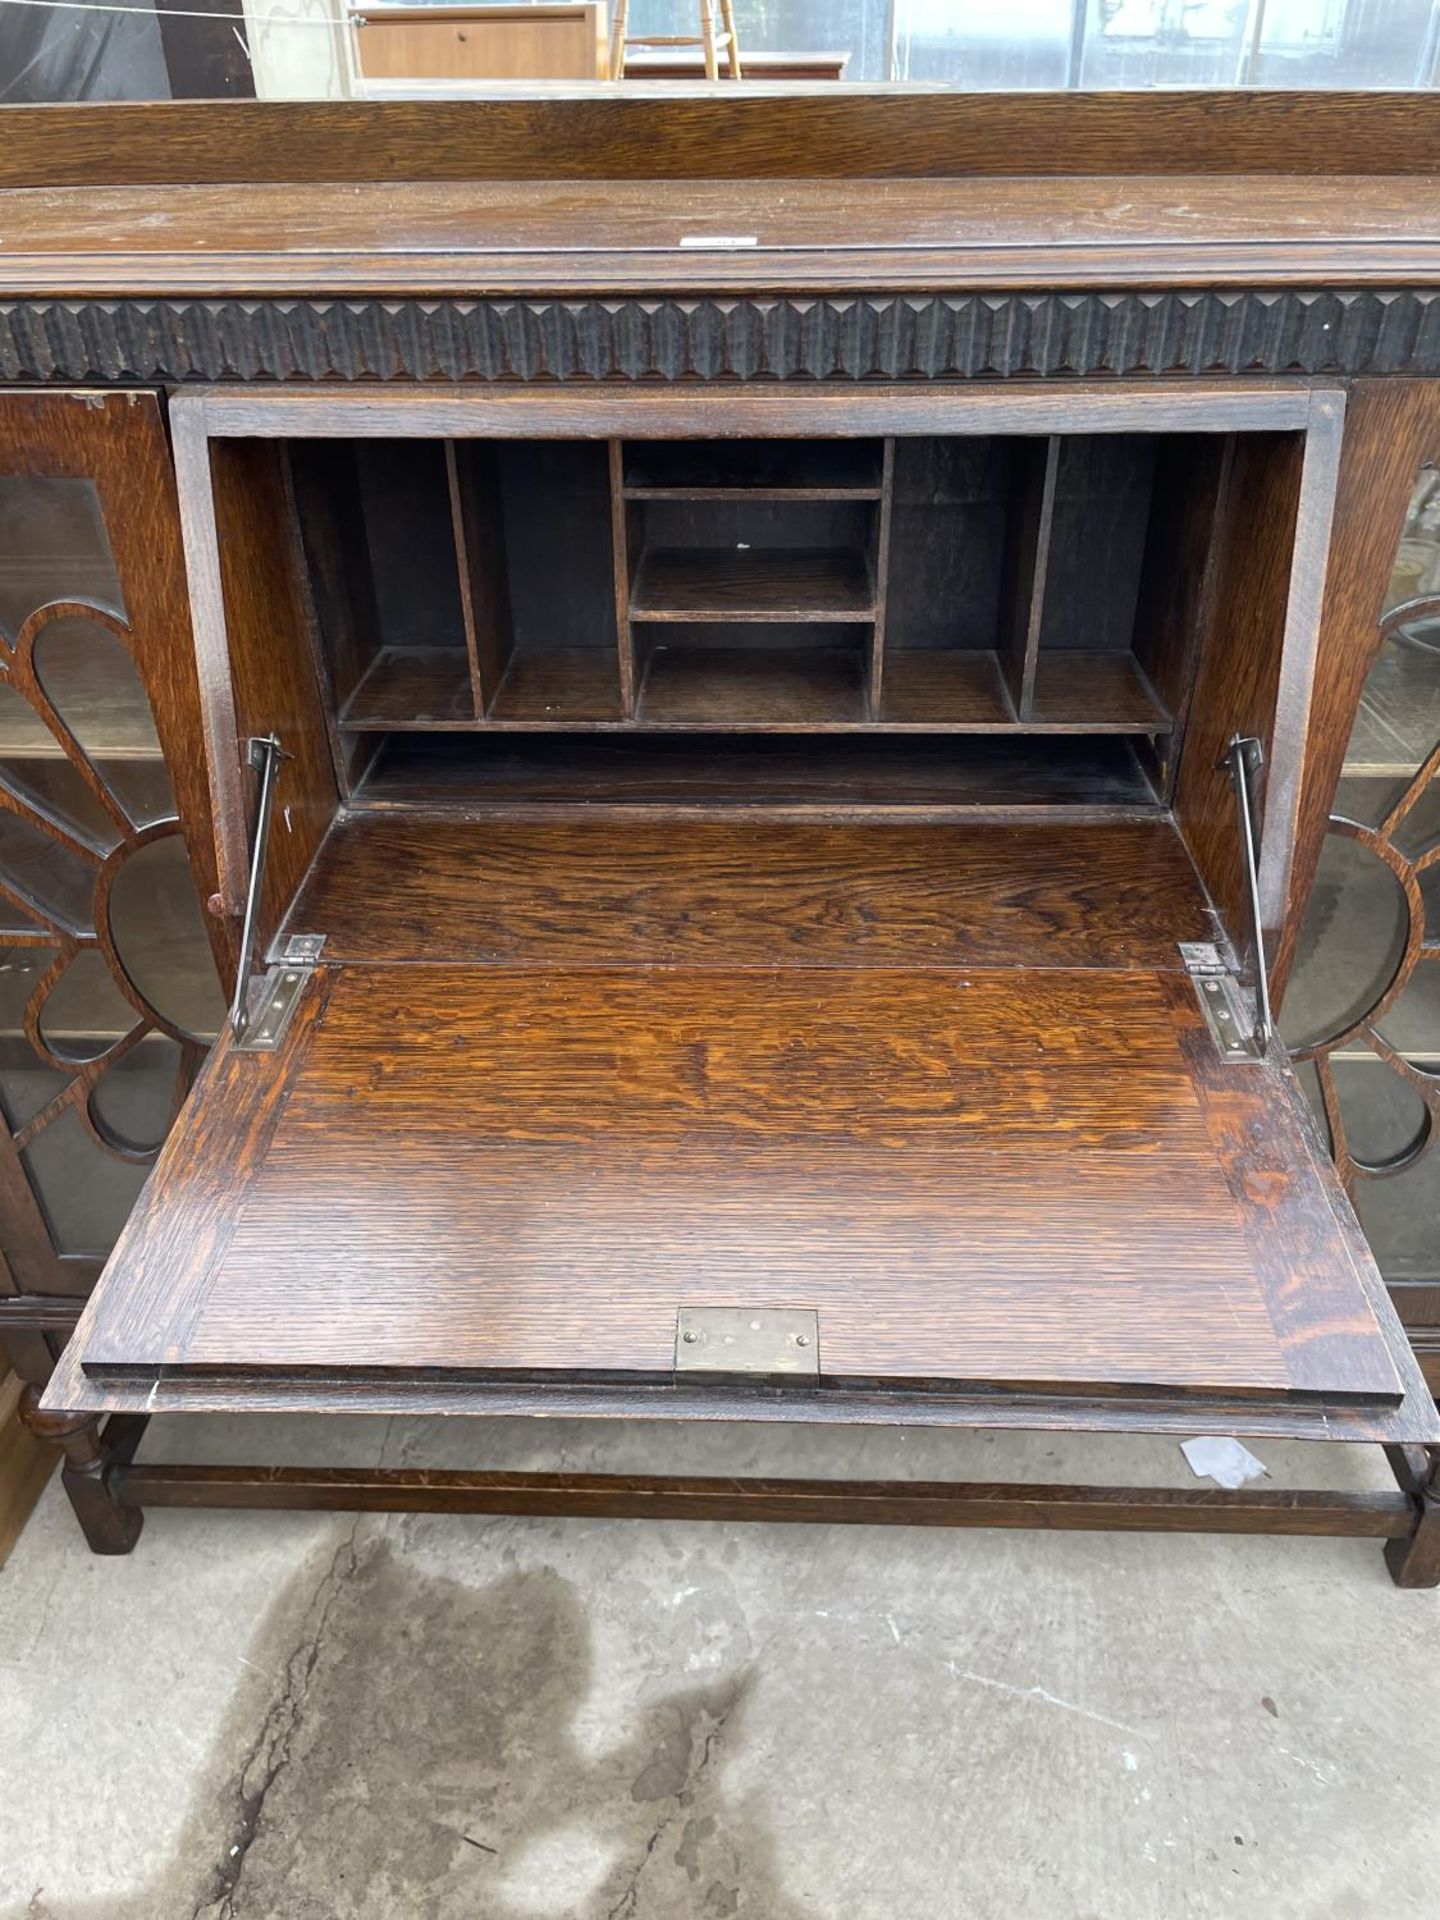 AN EARLY 20TH CENTURY OAK SIDE BY SIDE CABINET, 48" WIDE GLASS ON RIGHT PANEL NEEDS REPLACING - Image 5 of 5